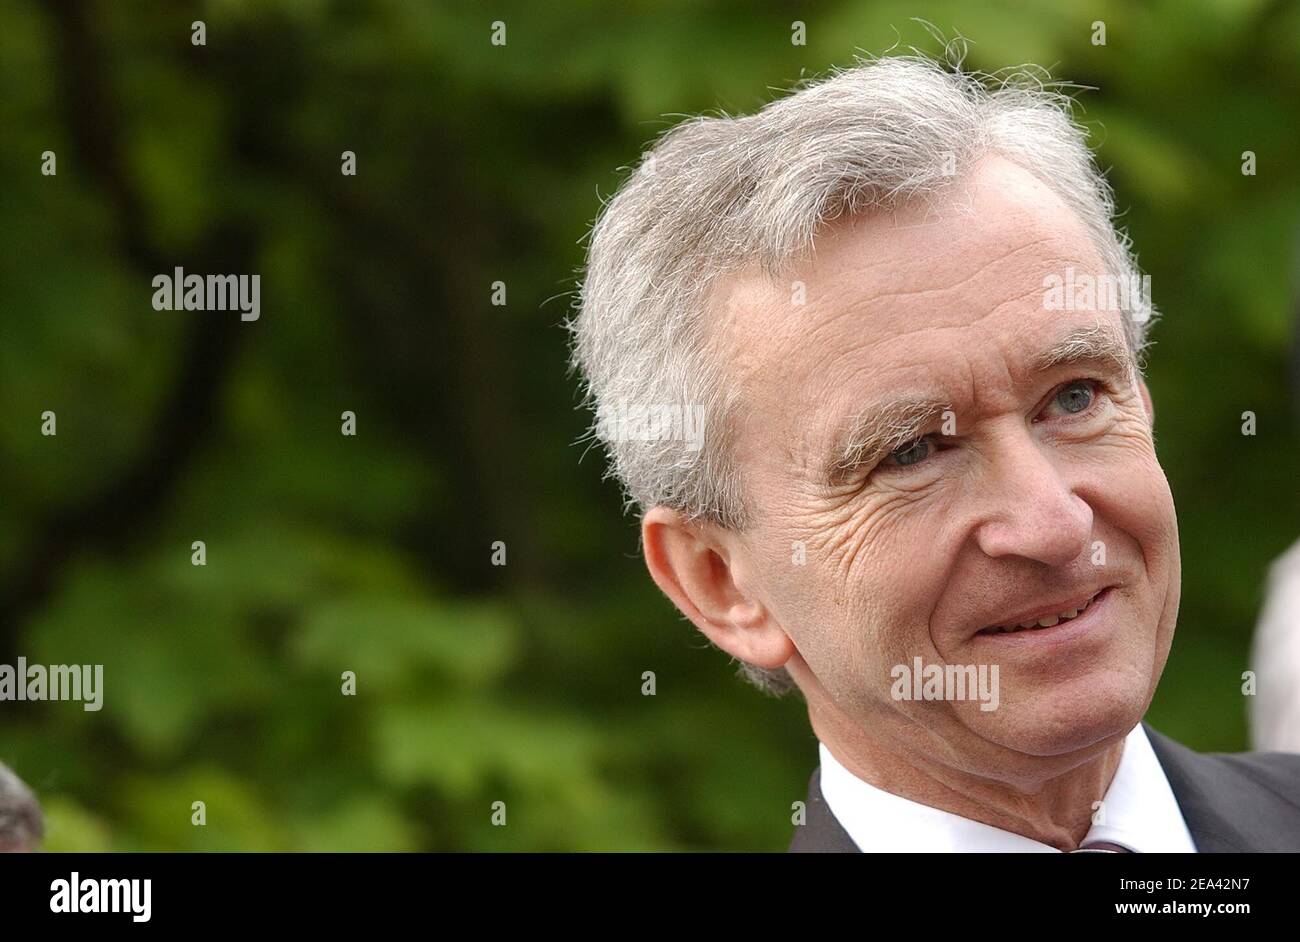 LVMH CEO, Bernard Arnault visits the garden with General auctioneer of the  exposure, Jean-Luc Dufresne at the the Christian Dior's house and museum in  Granville, Britain coast of France on May 14